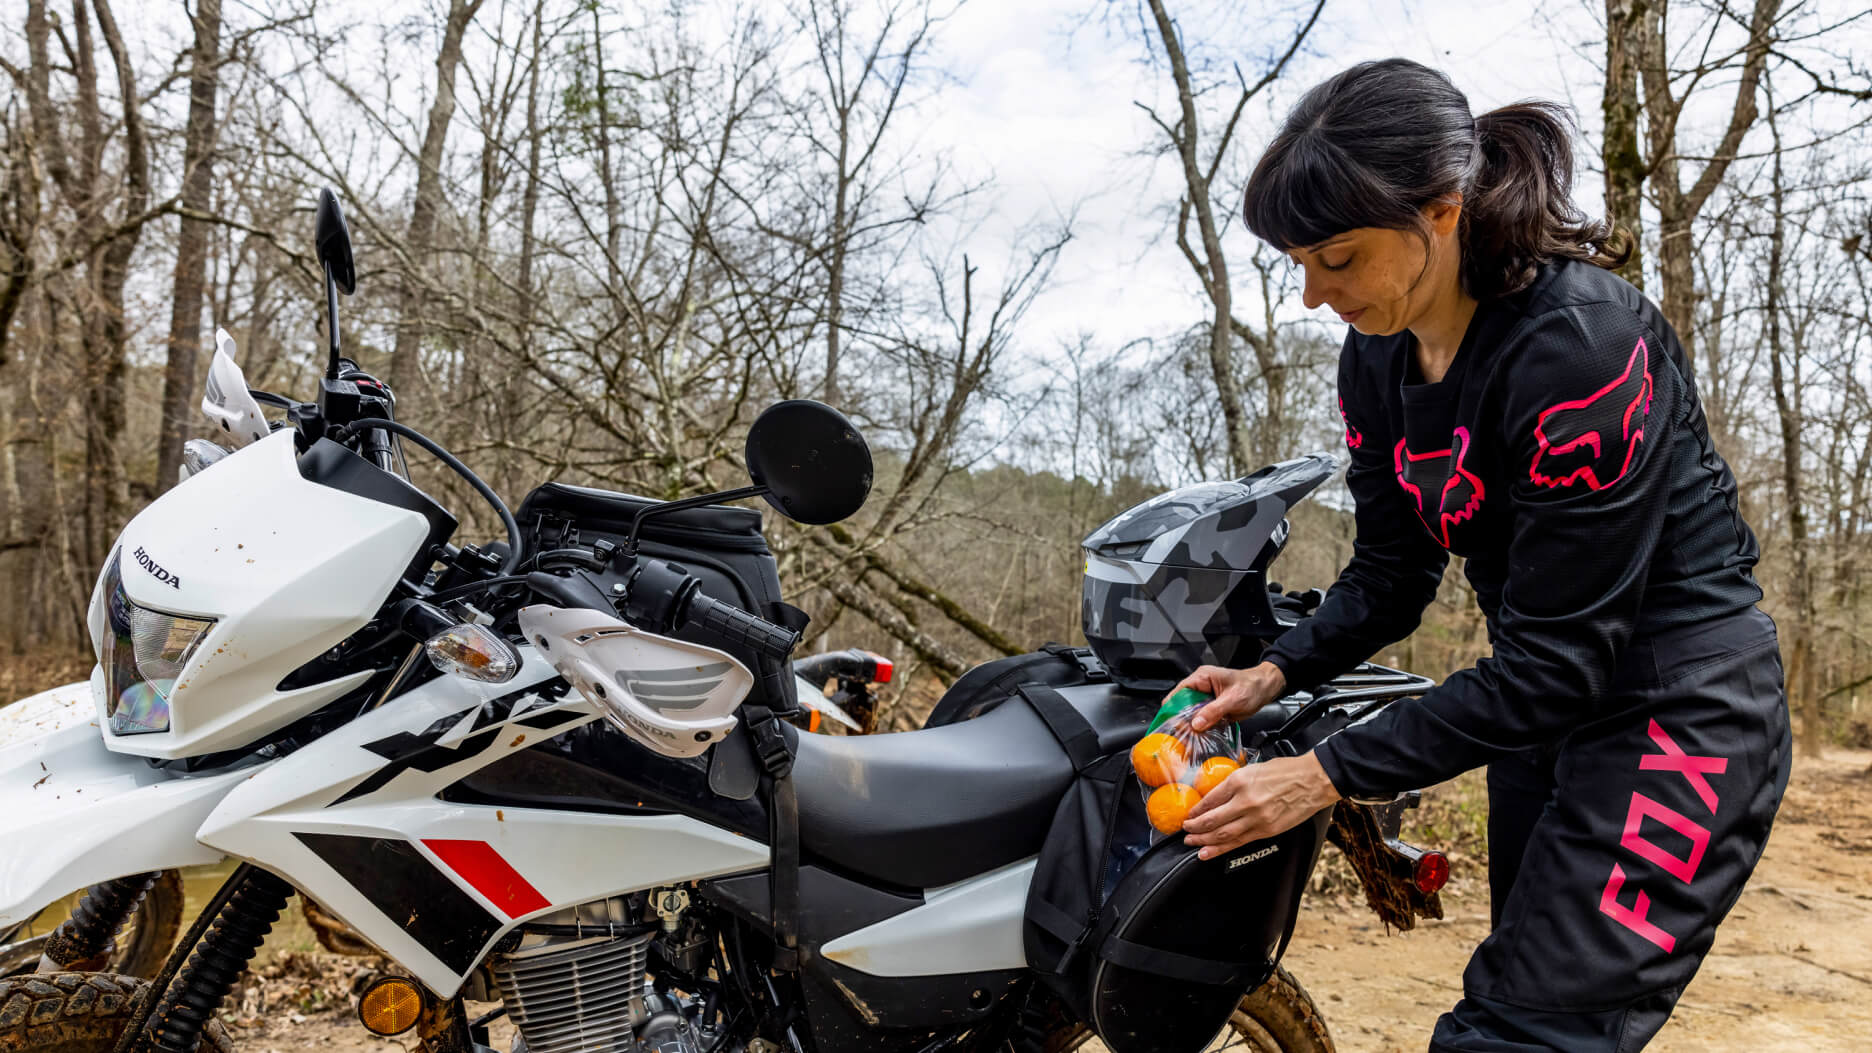 A rider beside a Honda XR150L putting some snacks in her bag